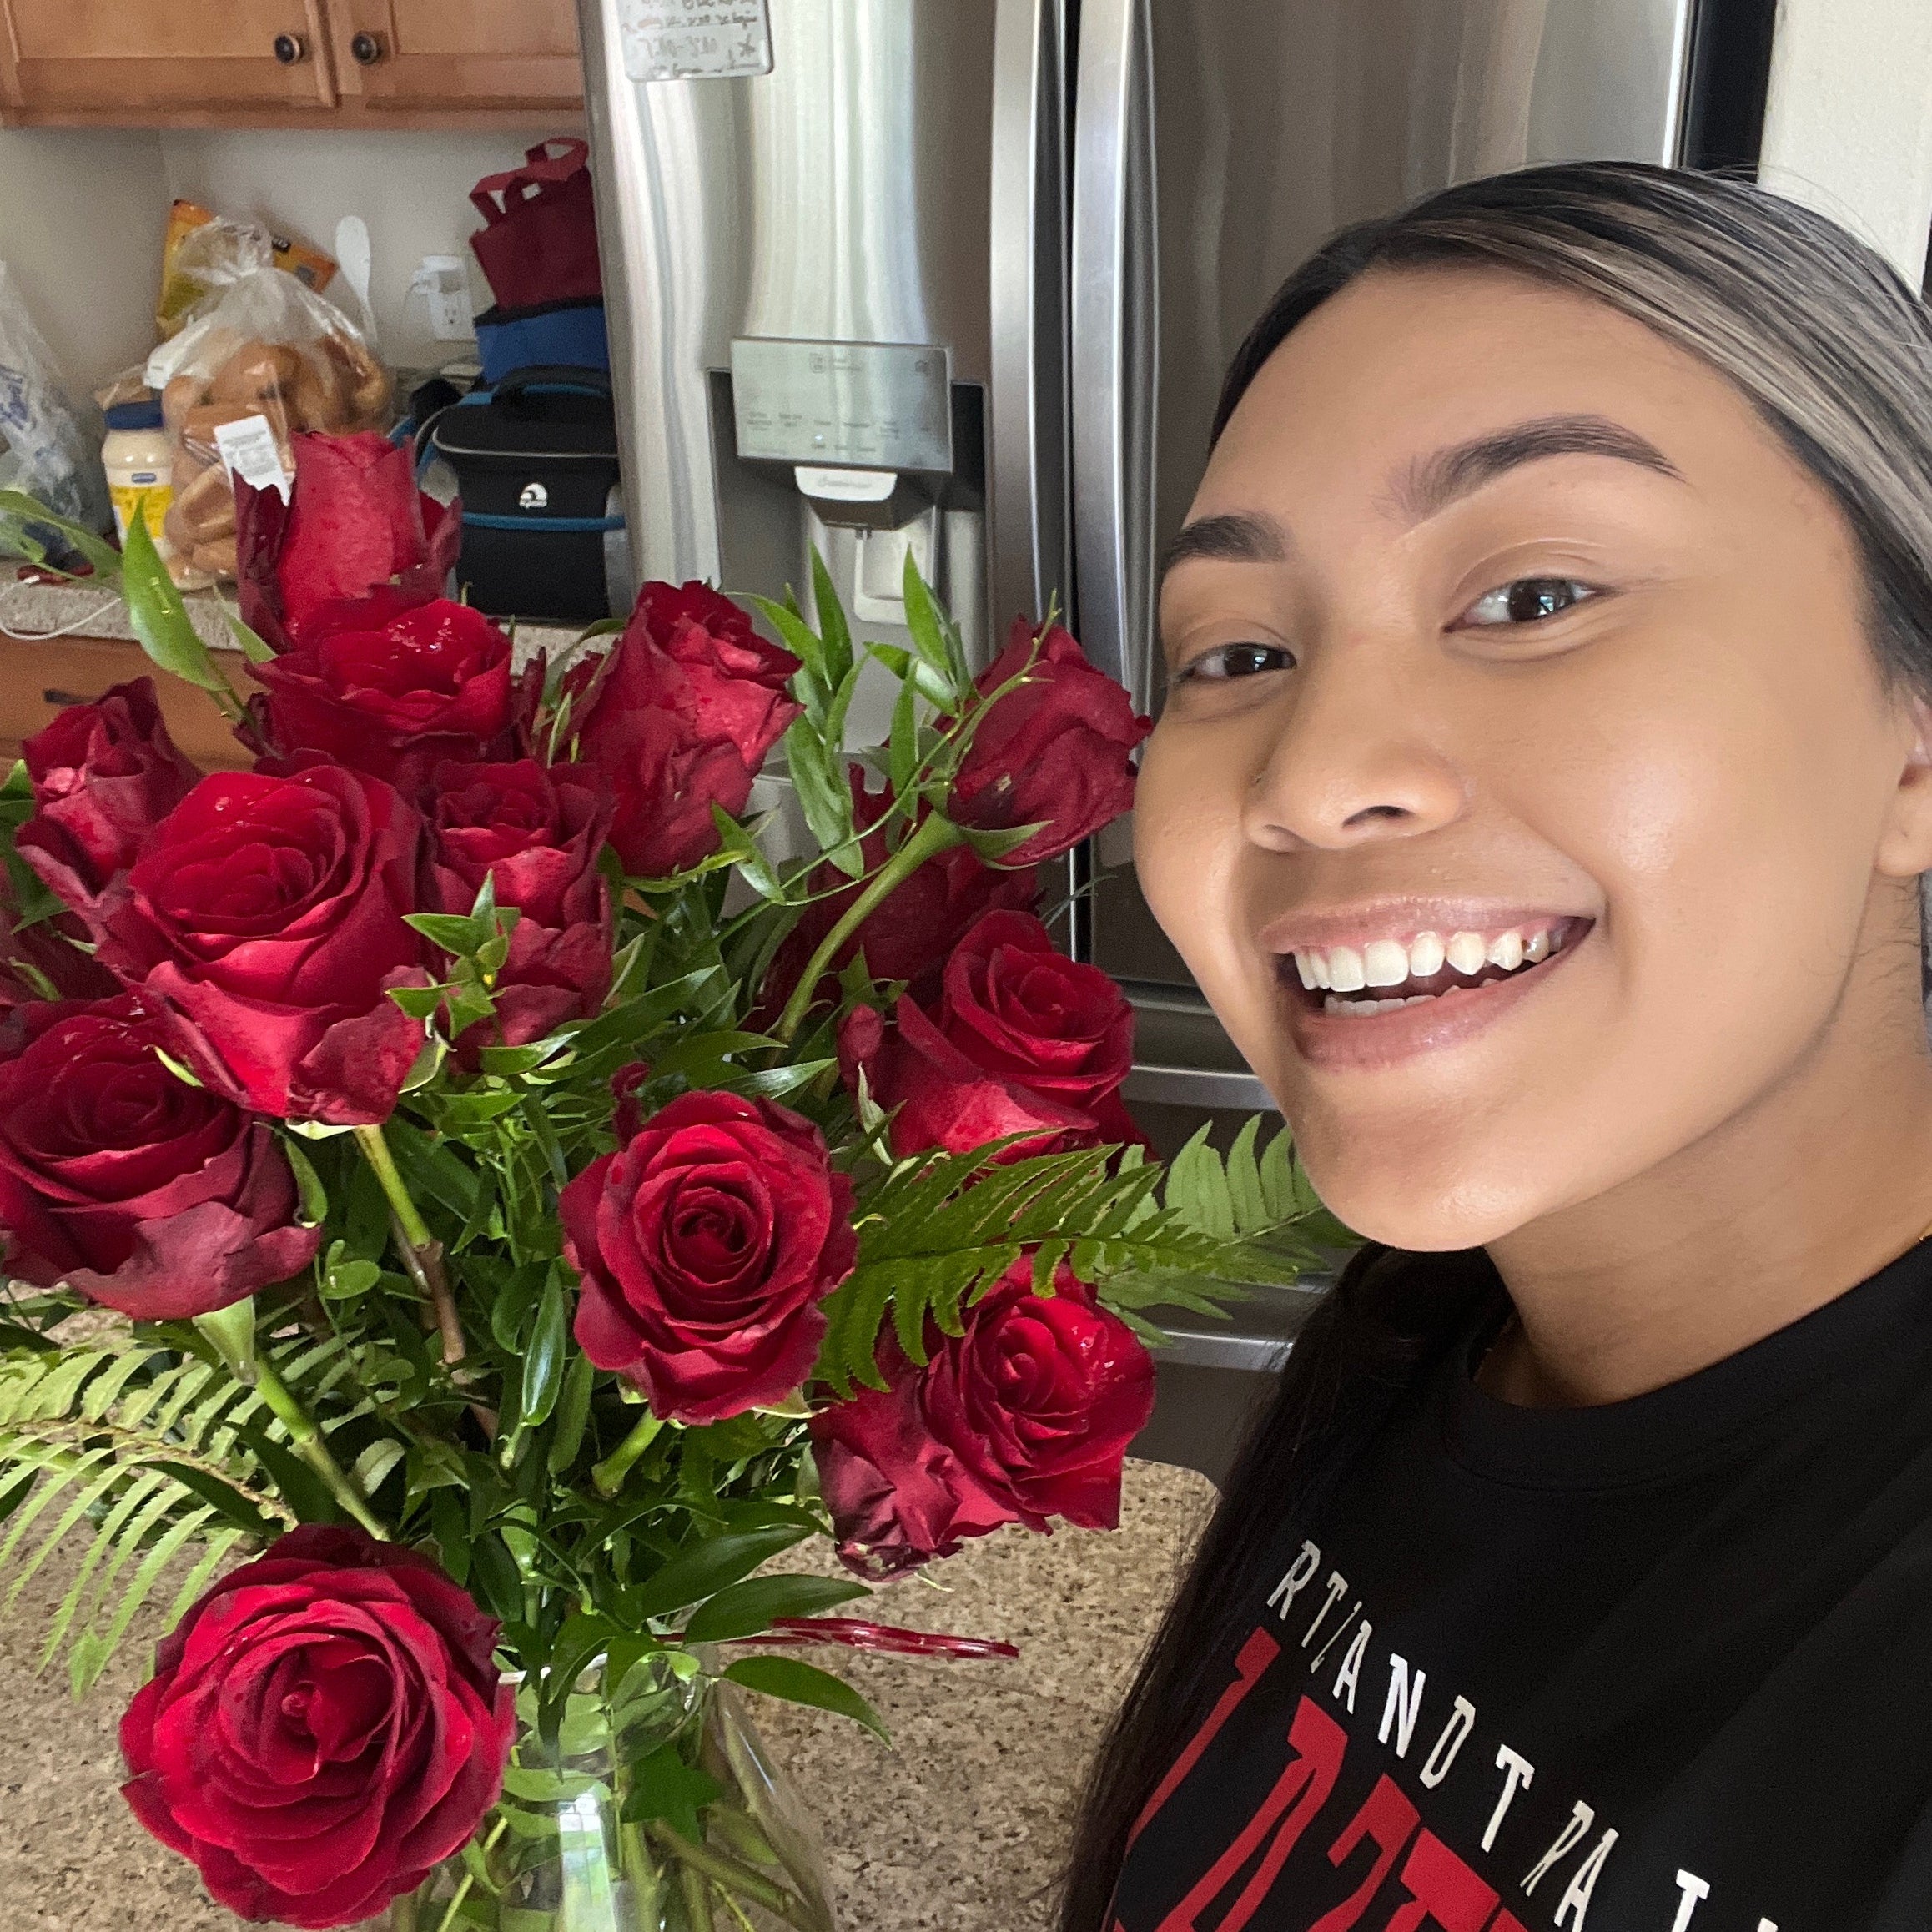 Recipient submitted photo saying thanks for Two Dozen Red Roses